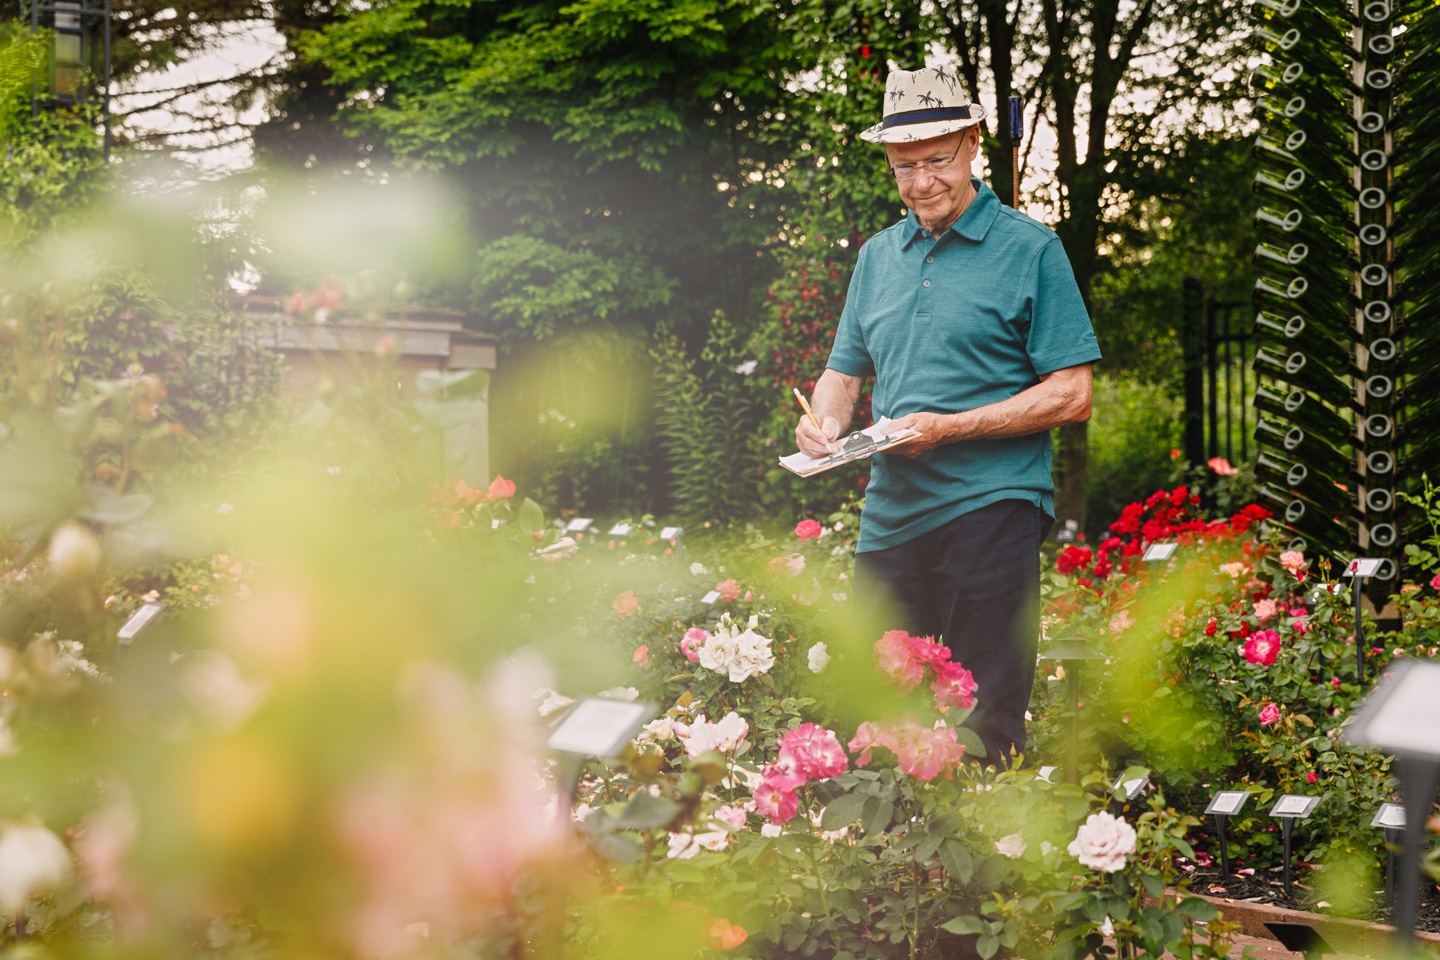 agriculture photographer Midwest - Will Radler, inventor of the Knockout Rose, working in his test garden